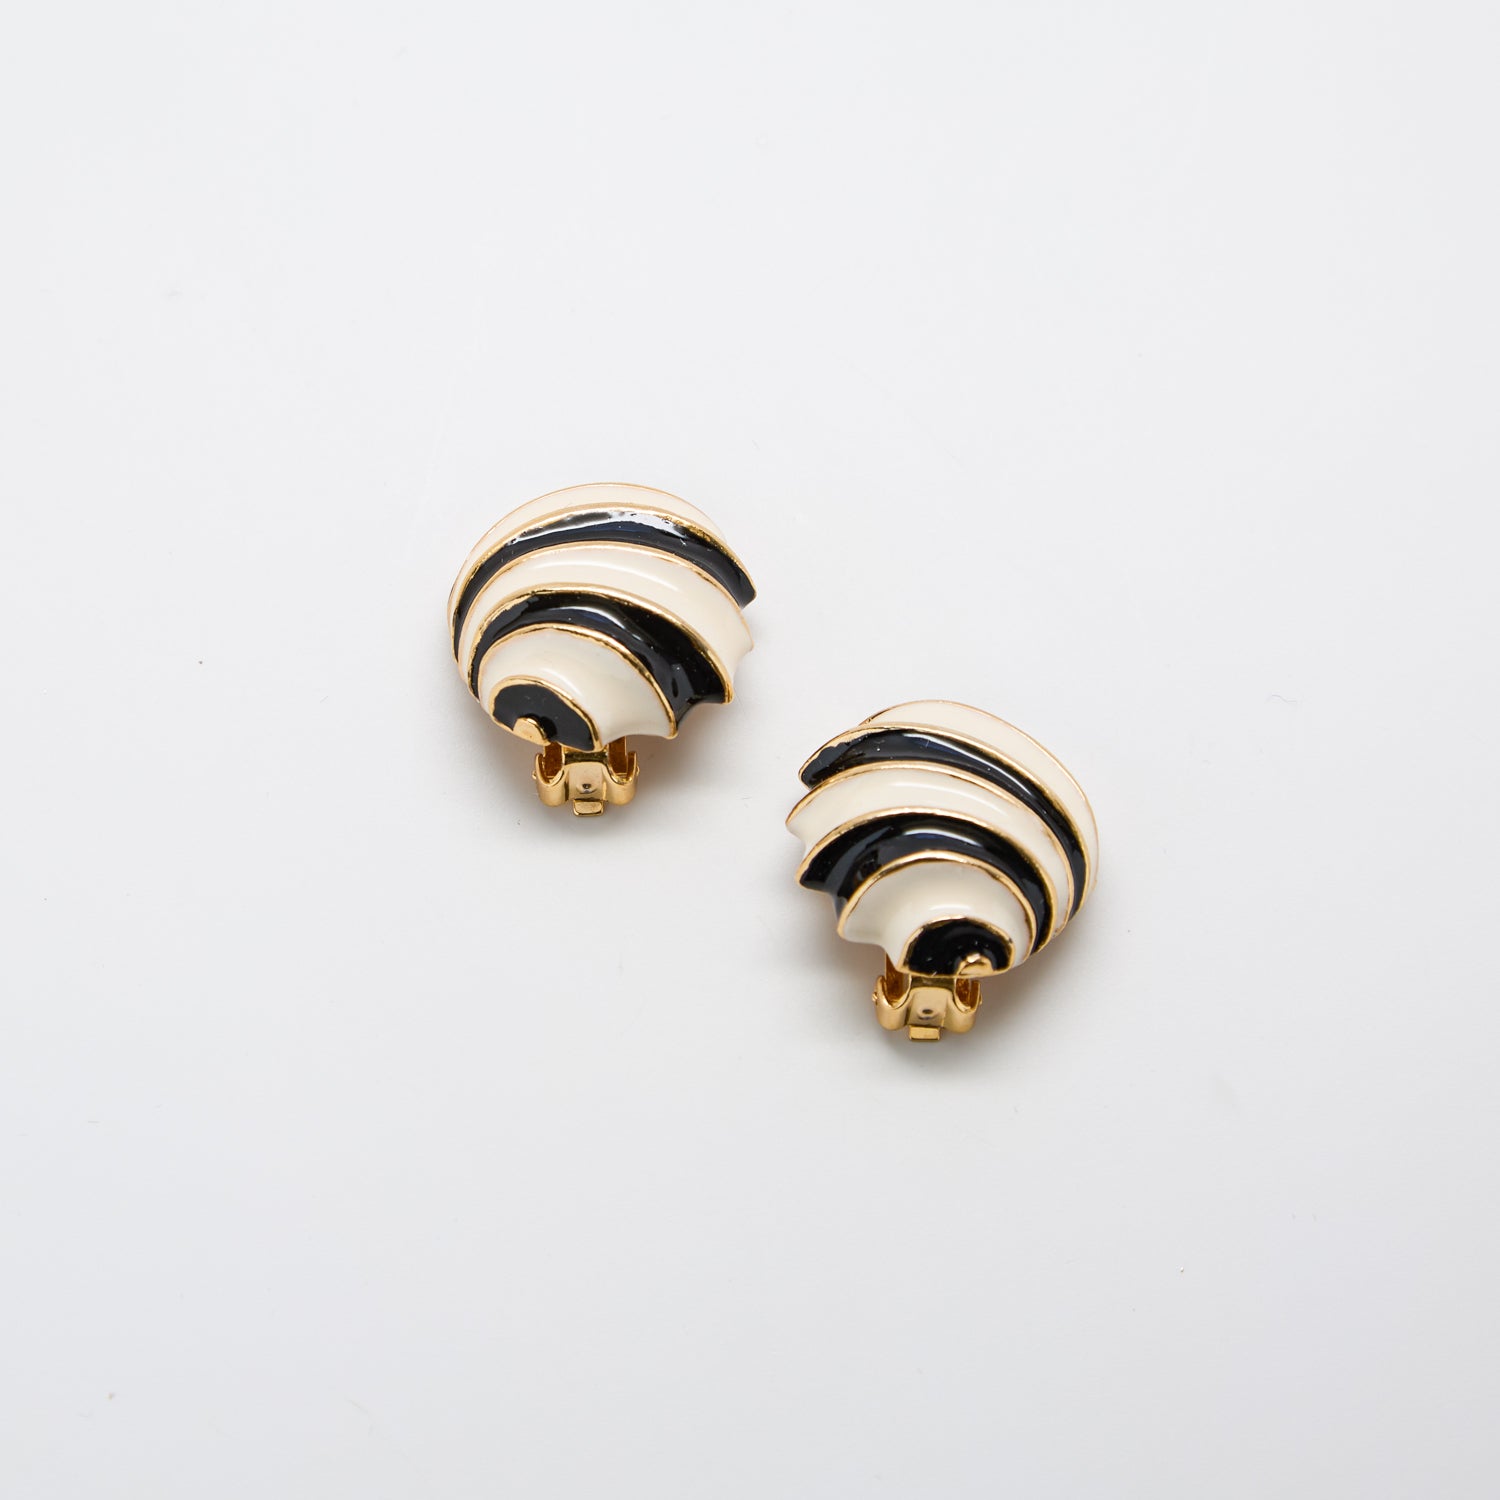 Vintage Black and White Clip-on Earrings